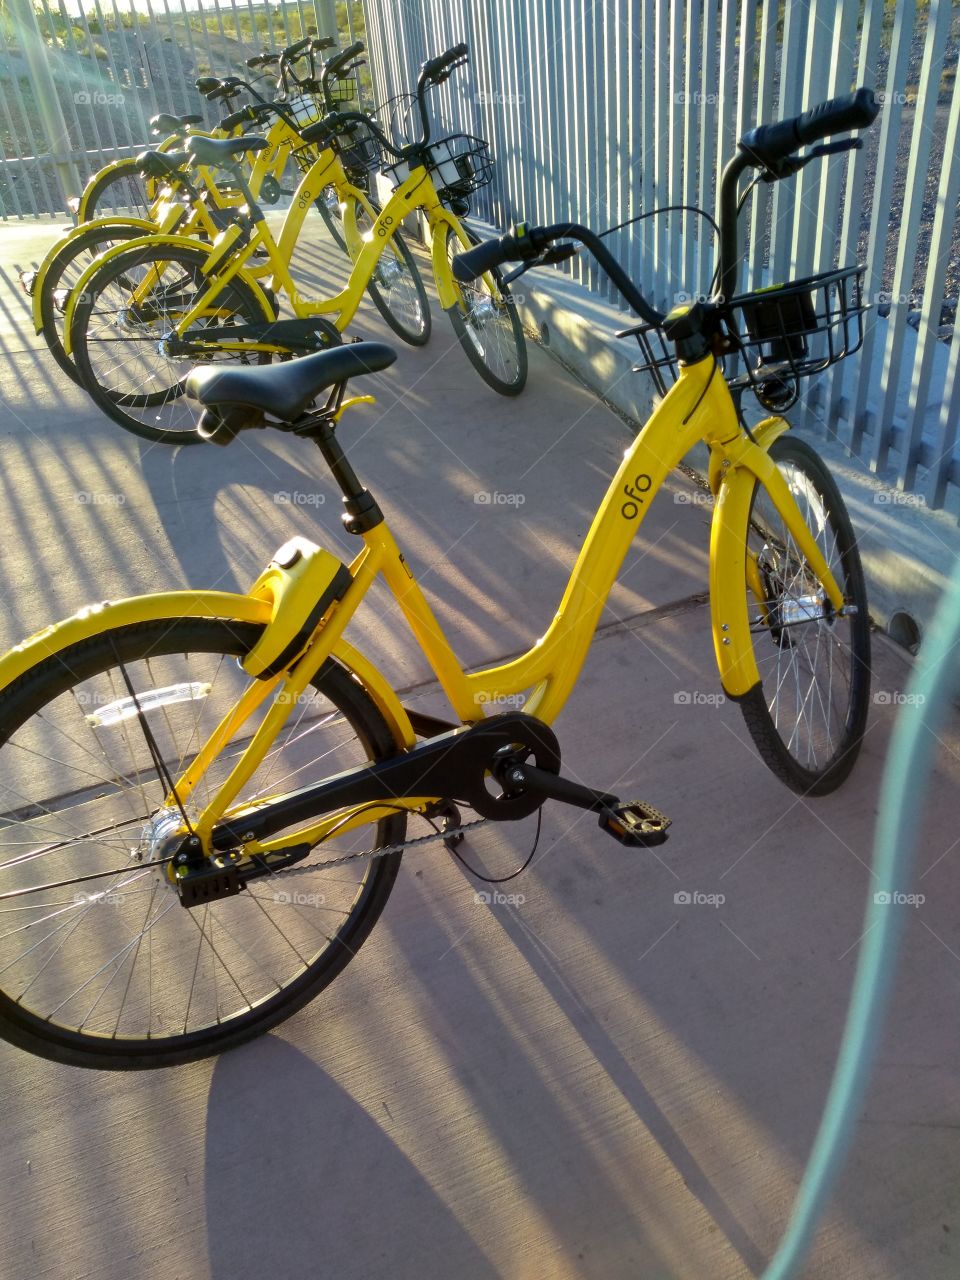 ofo bikes - the ride was nice!